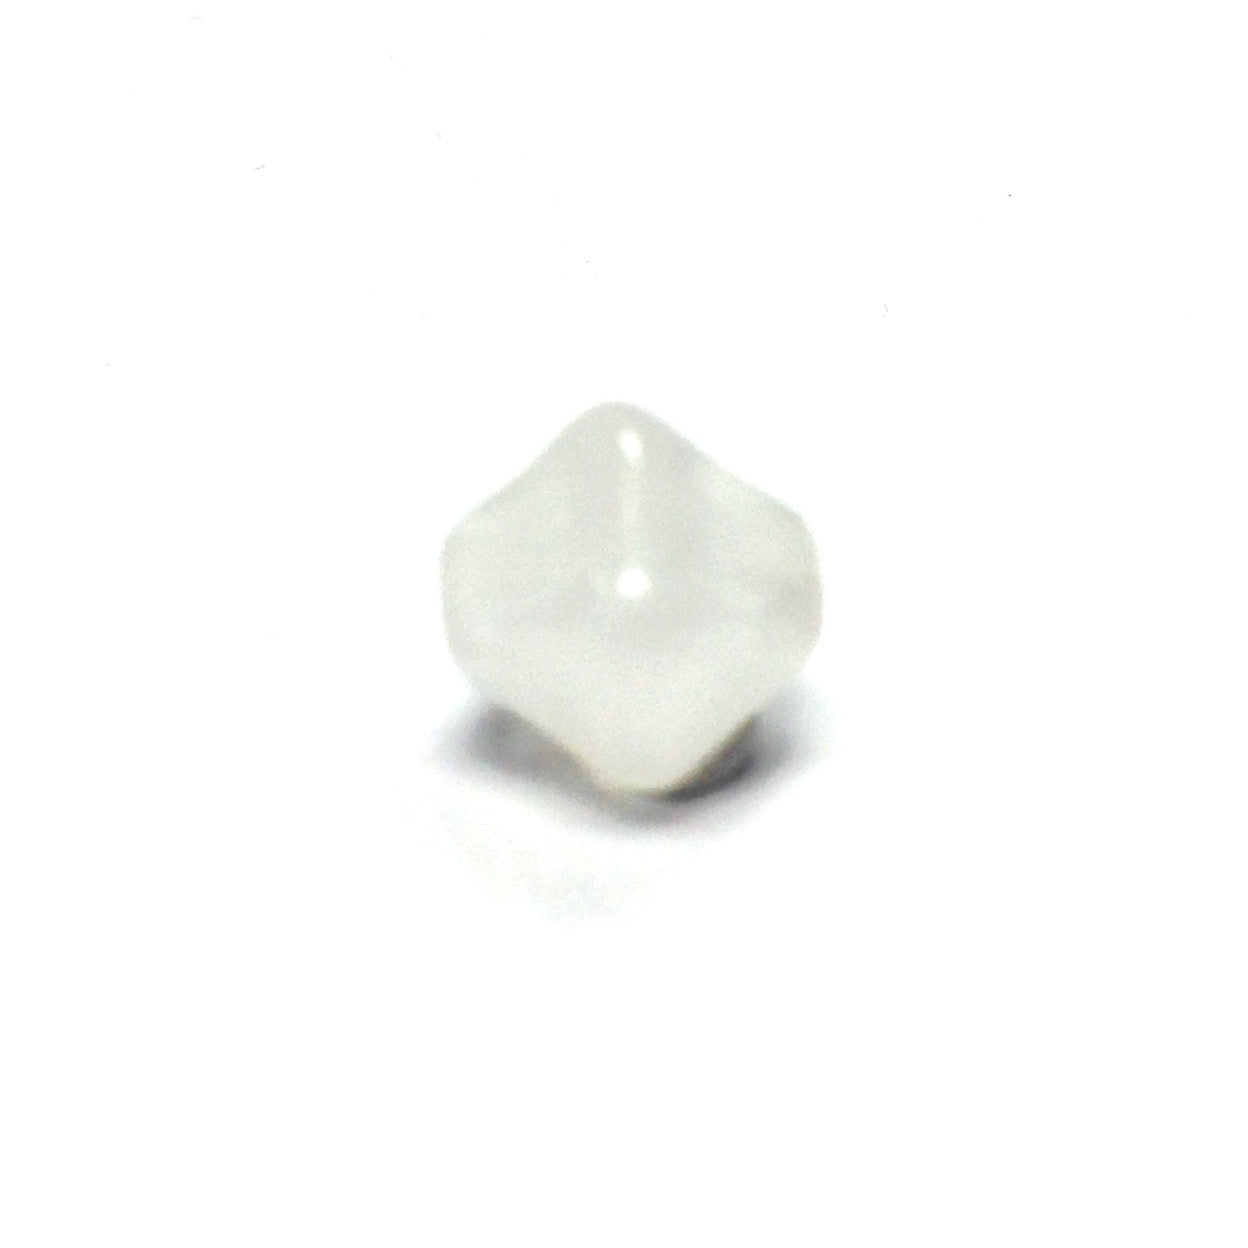 8MM White Glass Pyramid Bead (72 pieces)